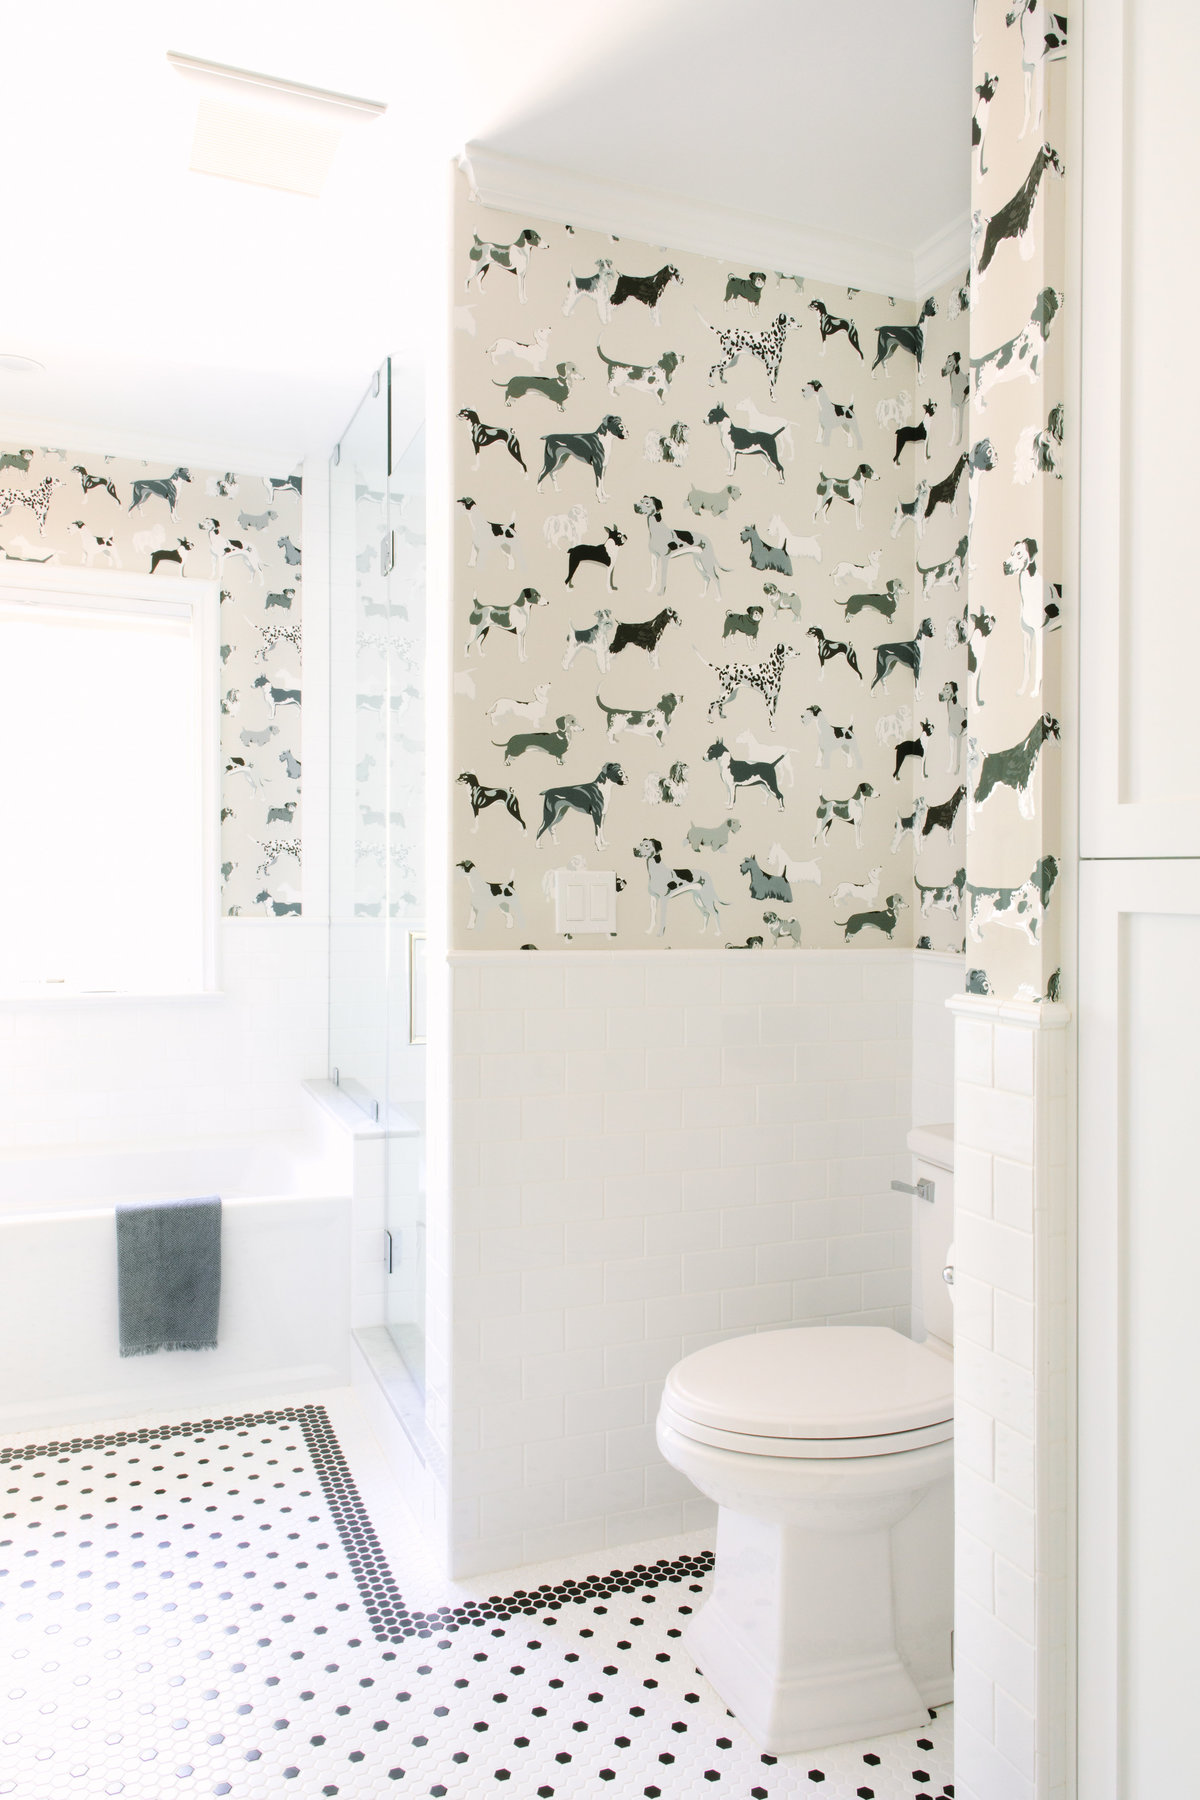 Black and white bathroom with dog wallpaper, subway tile, and black and white hexagon floor tile